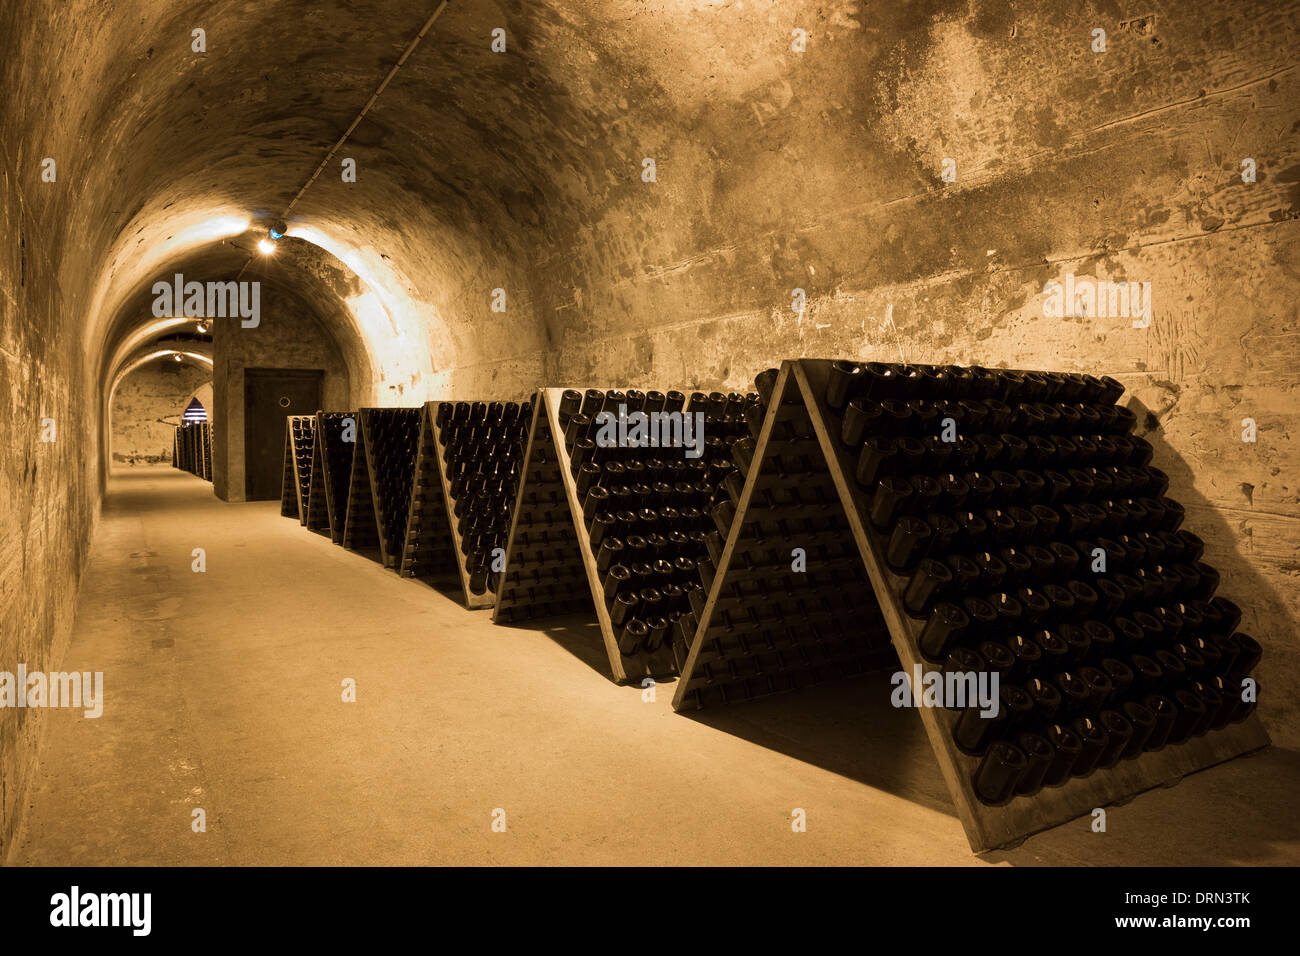 Methuselah bottles of champagne in frames for remuage in caves of Champagne Taittinger in Reims, Champagne-Ardenne, France Stock Photo